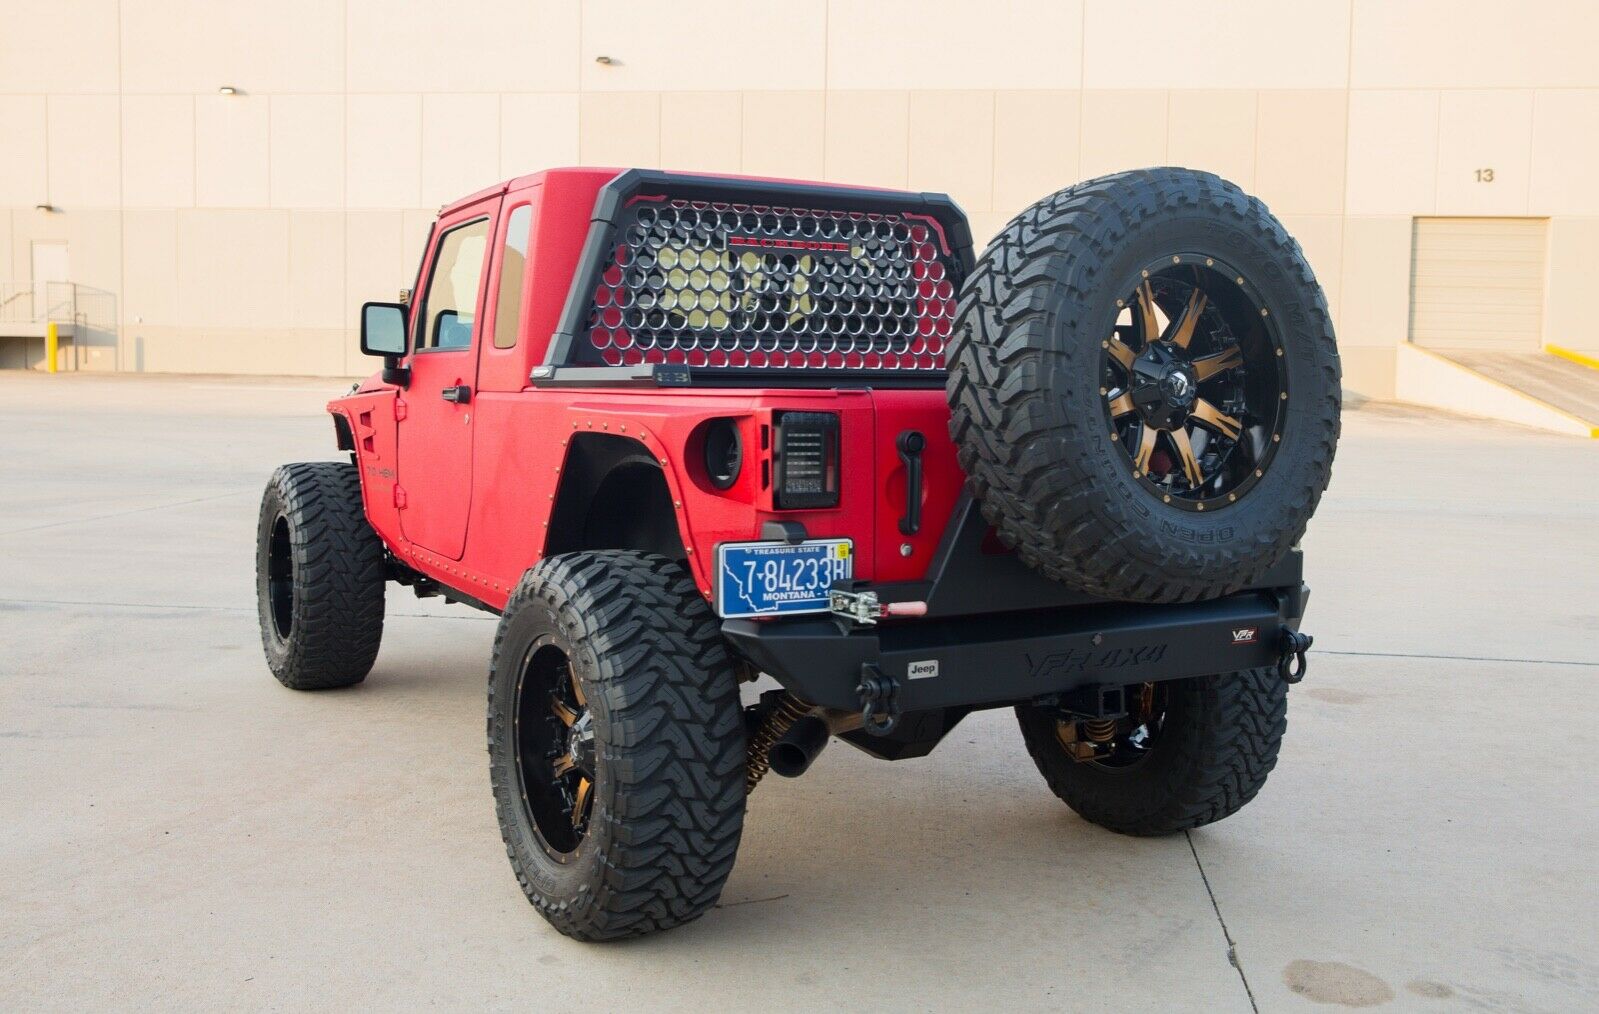 At $99,000, Would You Buy Into This  Hemi V8 Jeep Wrangler Pickup? |  Carscoops